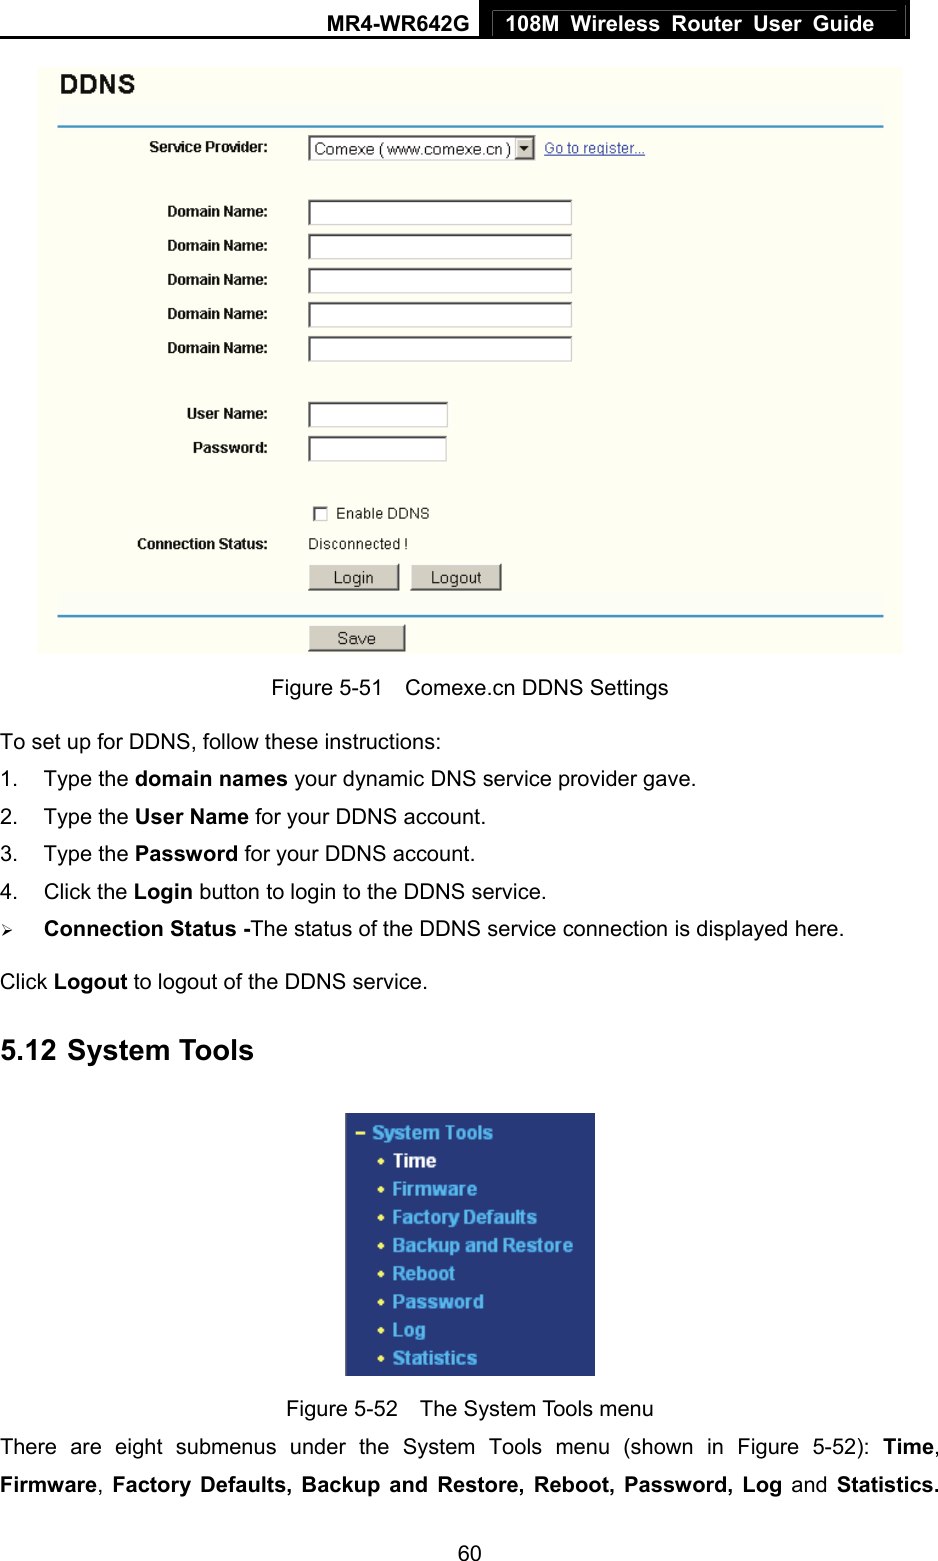 MR4-WR642G 108M Wireless Router User Guide   60 Figure 5-51    Comexe.cn DDNS Settings To set up for DDNS, follow these instructions: 1. Type the domain names your dynamic DNS service provider gave.   2. Type the User Name for your DDNS account.   3. Type the Password for your DDNS account.   4. Click the Login button to login to the DDNS service. ¾ Connection Status -The status of the DDNS service connection is displayed here. Click Logout to logout of the DDNS service. 5.12 System Tools  Figure 5-52  The System Tools menu There are eight submenus under the System Tools menu (shown in Figure 5-52): Time, Firmware,  Factory Defaults, Backup and Restore, Reboot, Password, Log and Statistics. 